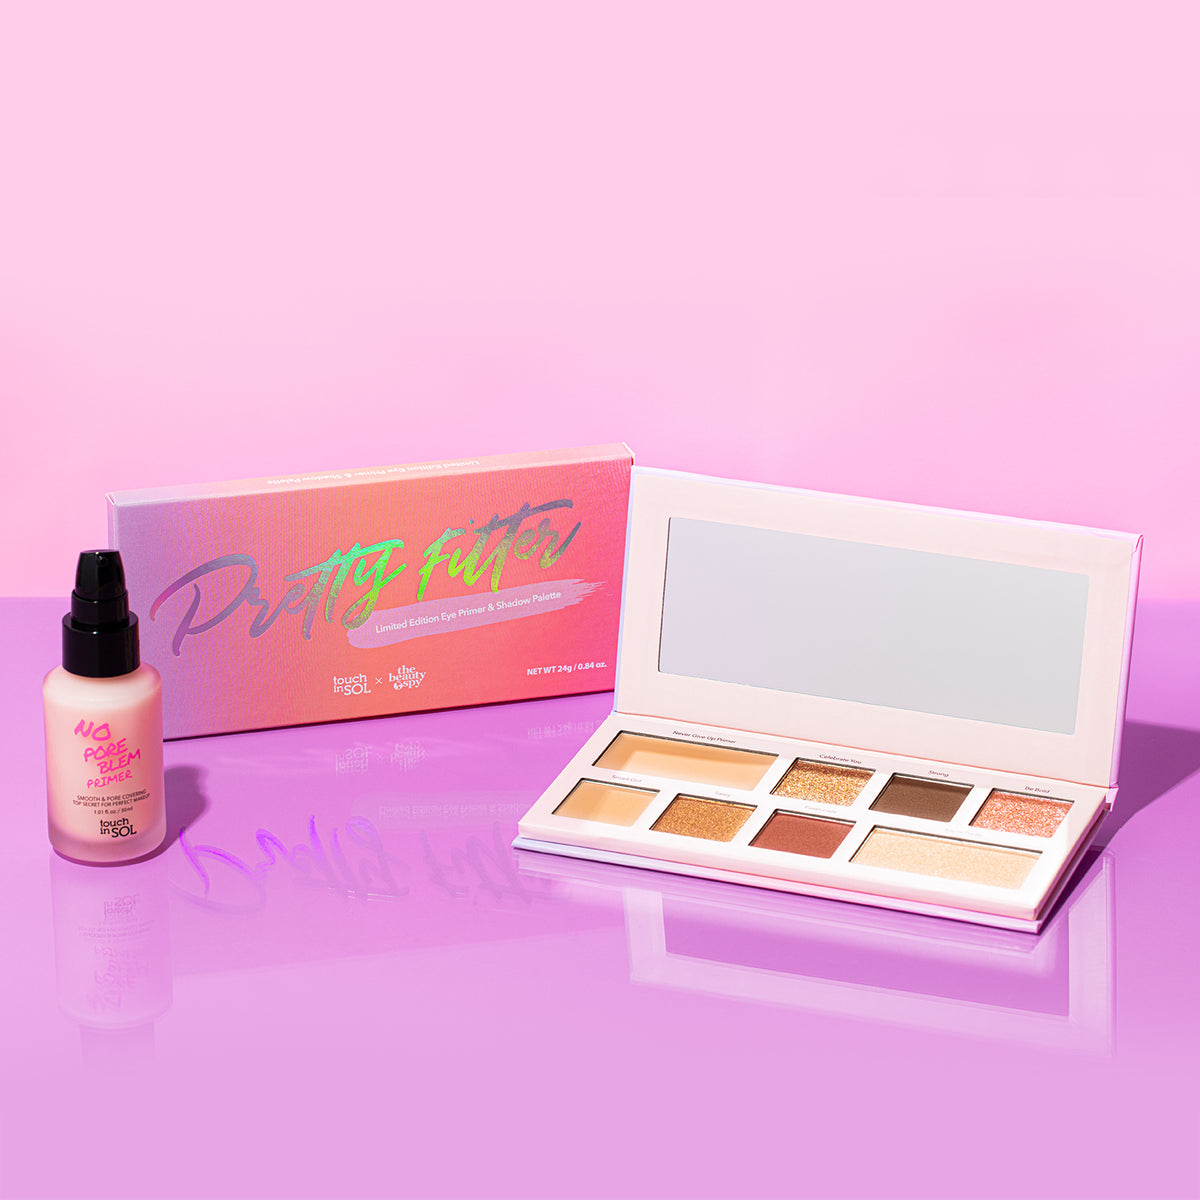 Beauty Spy x Touch in Sol Pretty Filter Eyeshadow Palette Limited Edition